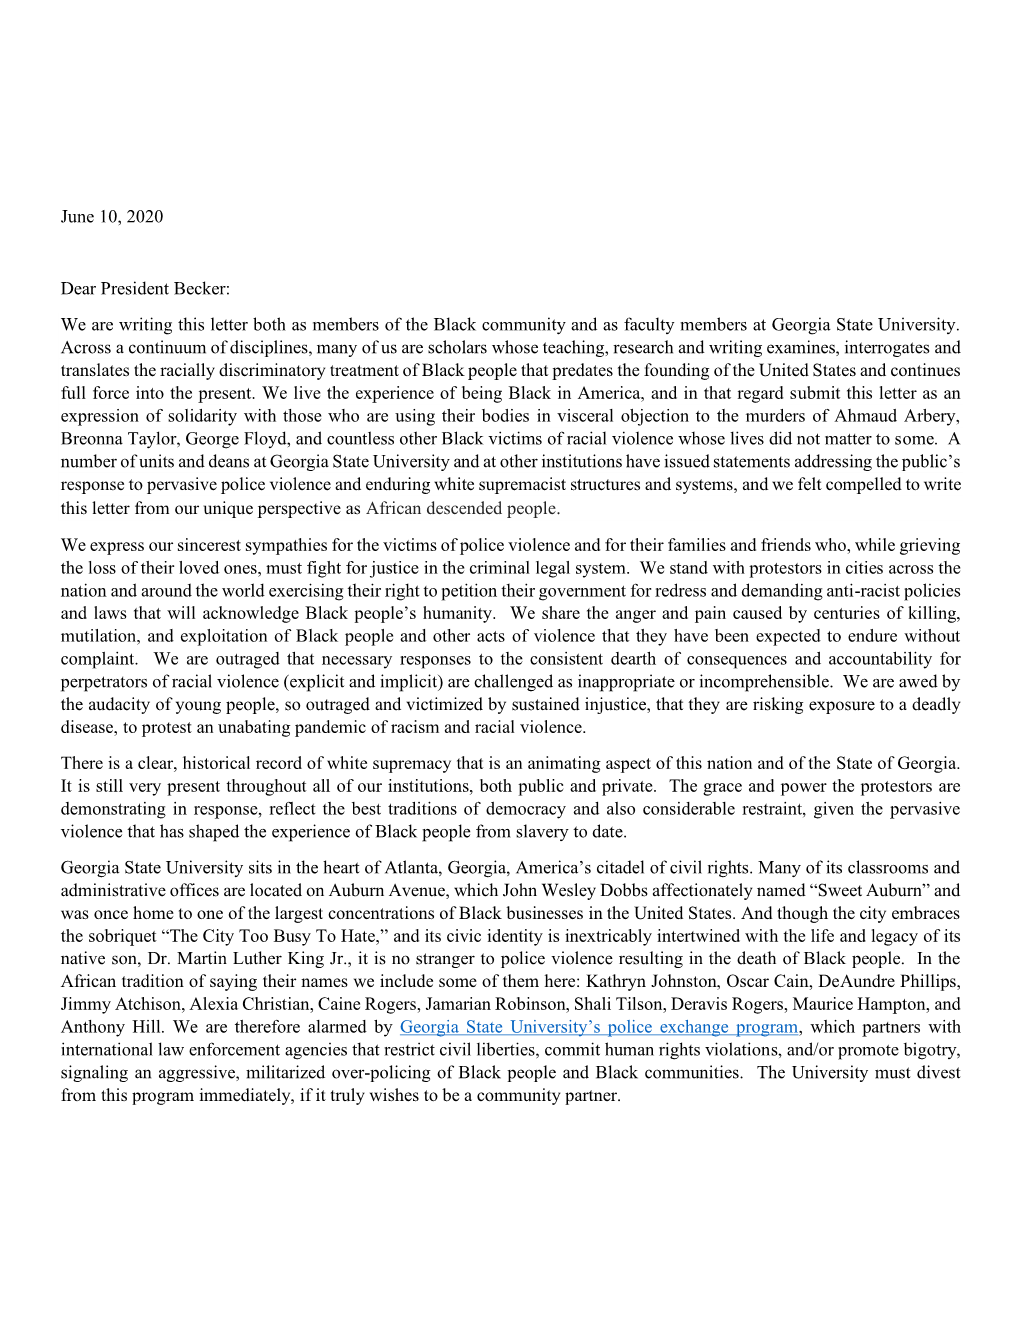 June 10, 2020 Dear President Becker: We Are Writing This Letter Both As Members of the Black Community and As Faculty Members